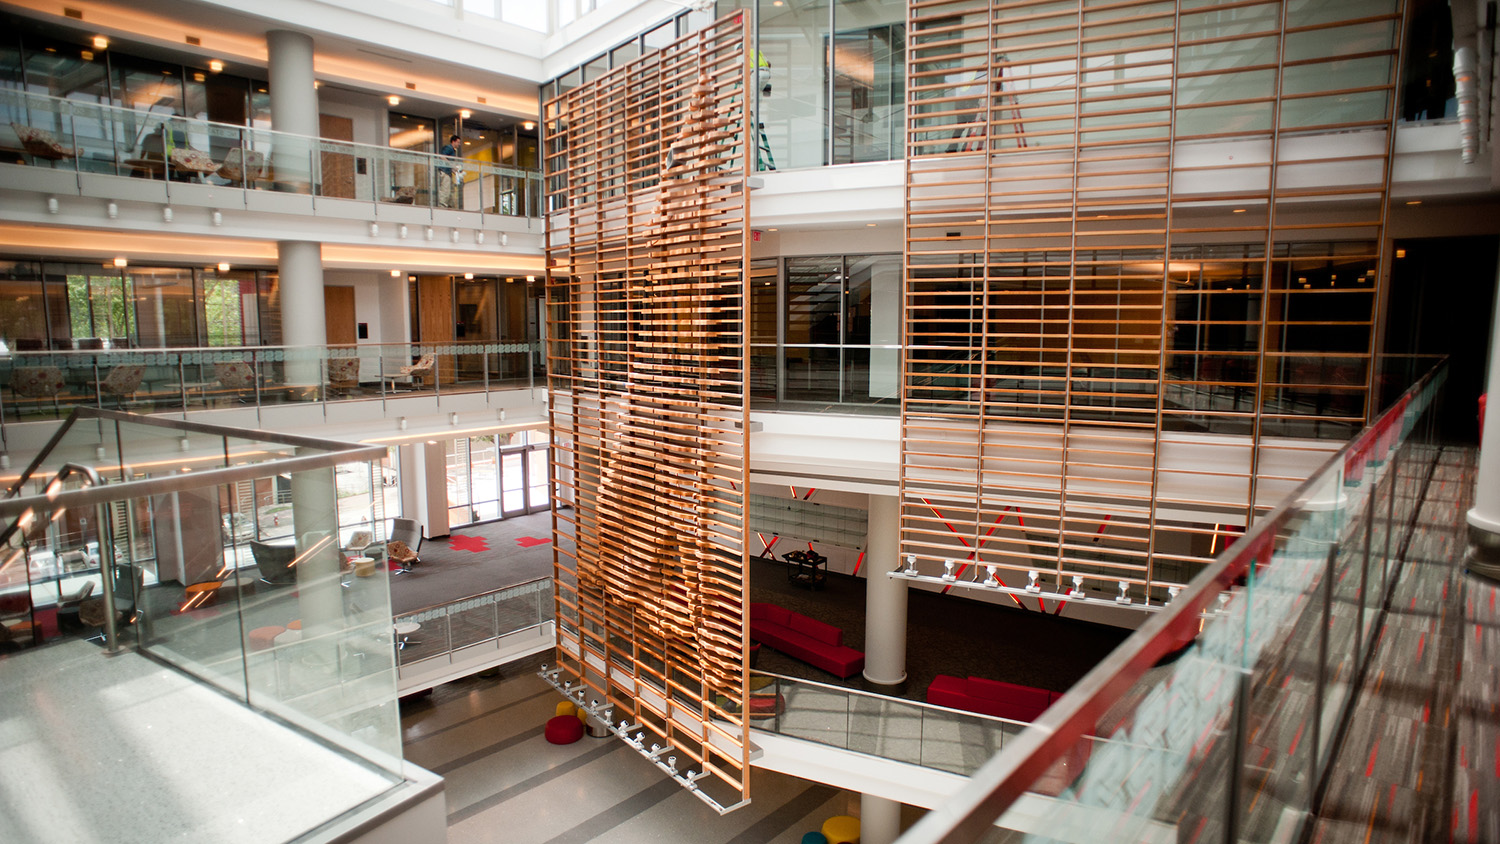 A view of the atrium in Talley Student Union from above.